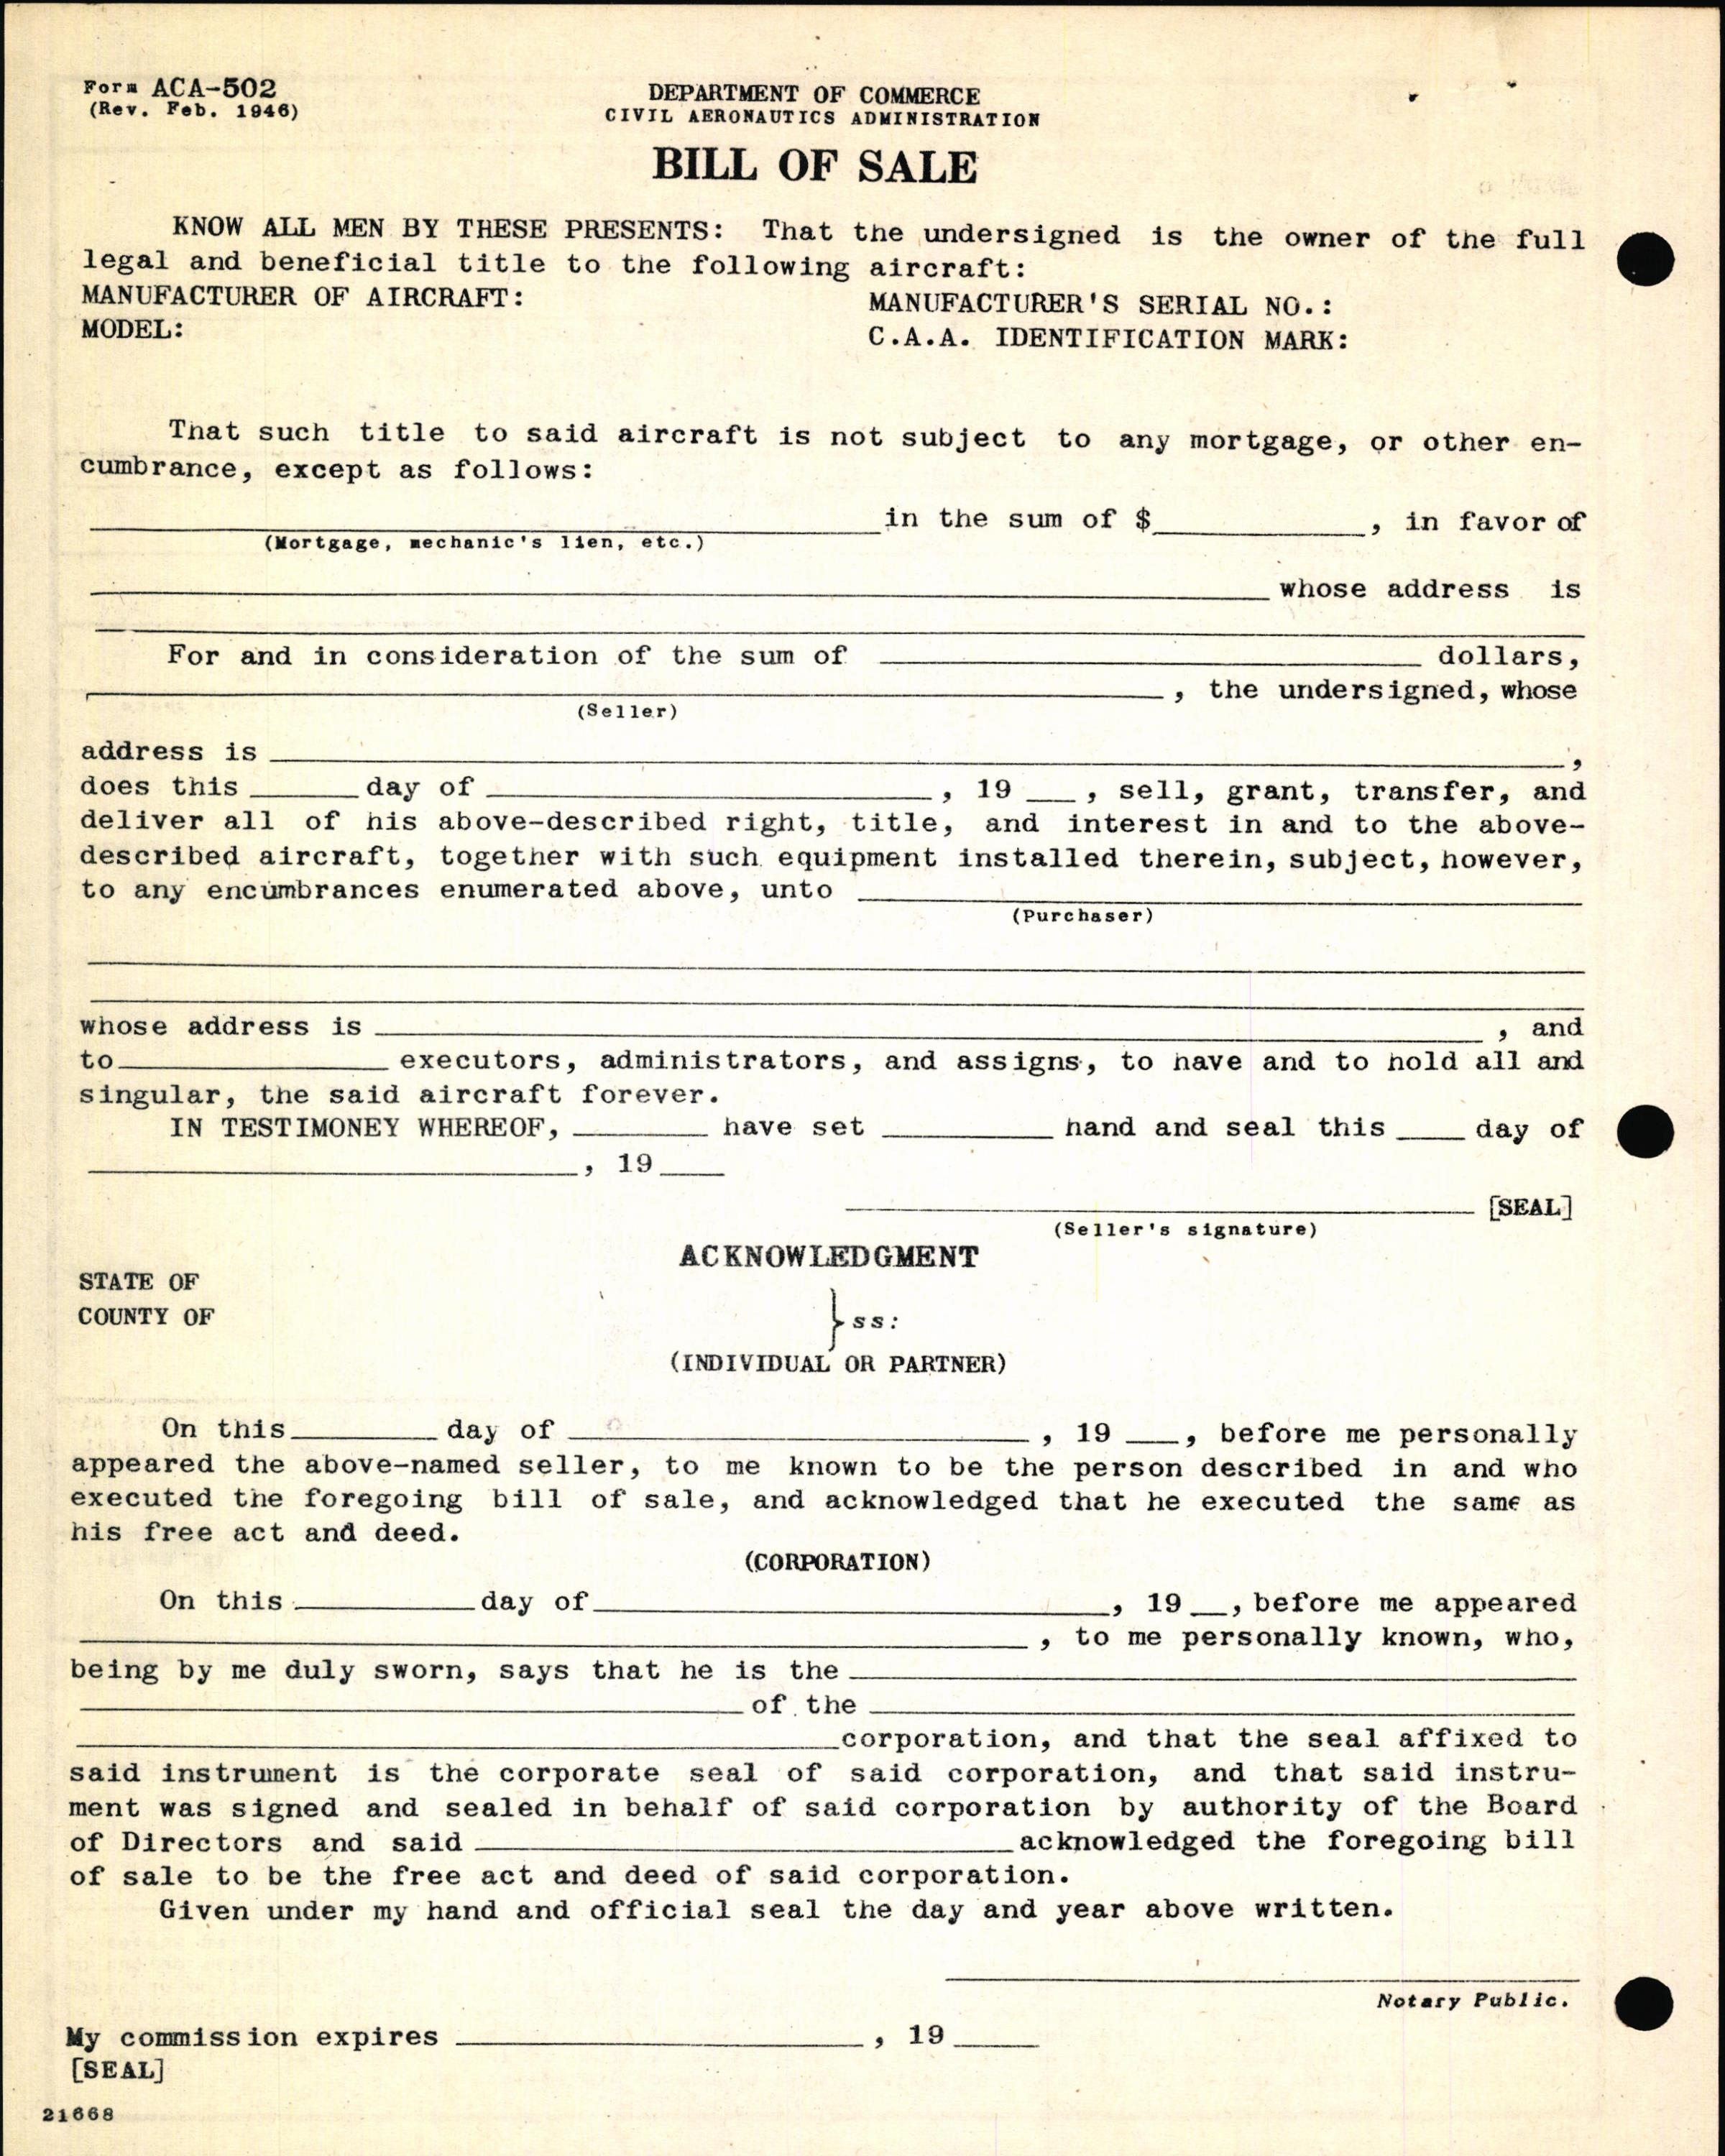 Sample page 6 from AirCorps Library document: Technical Information for Serial Number 1247